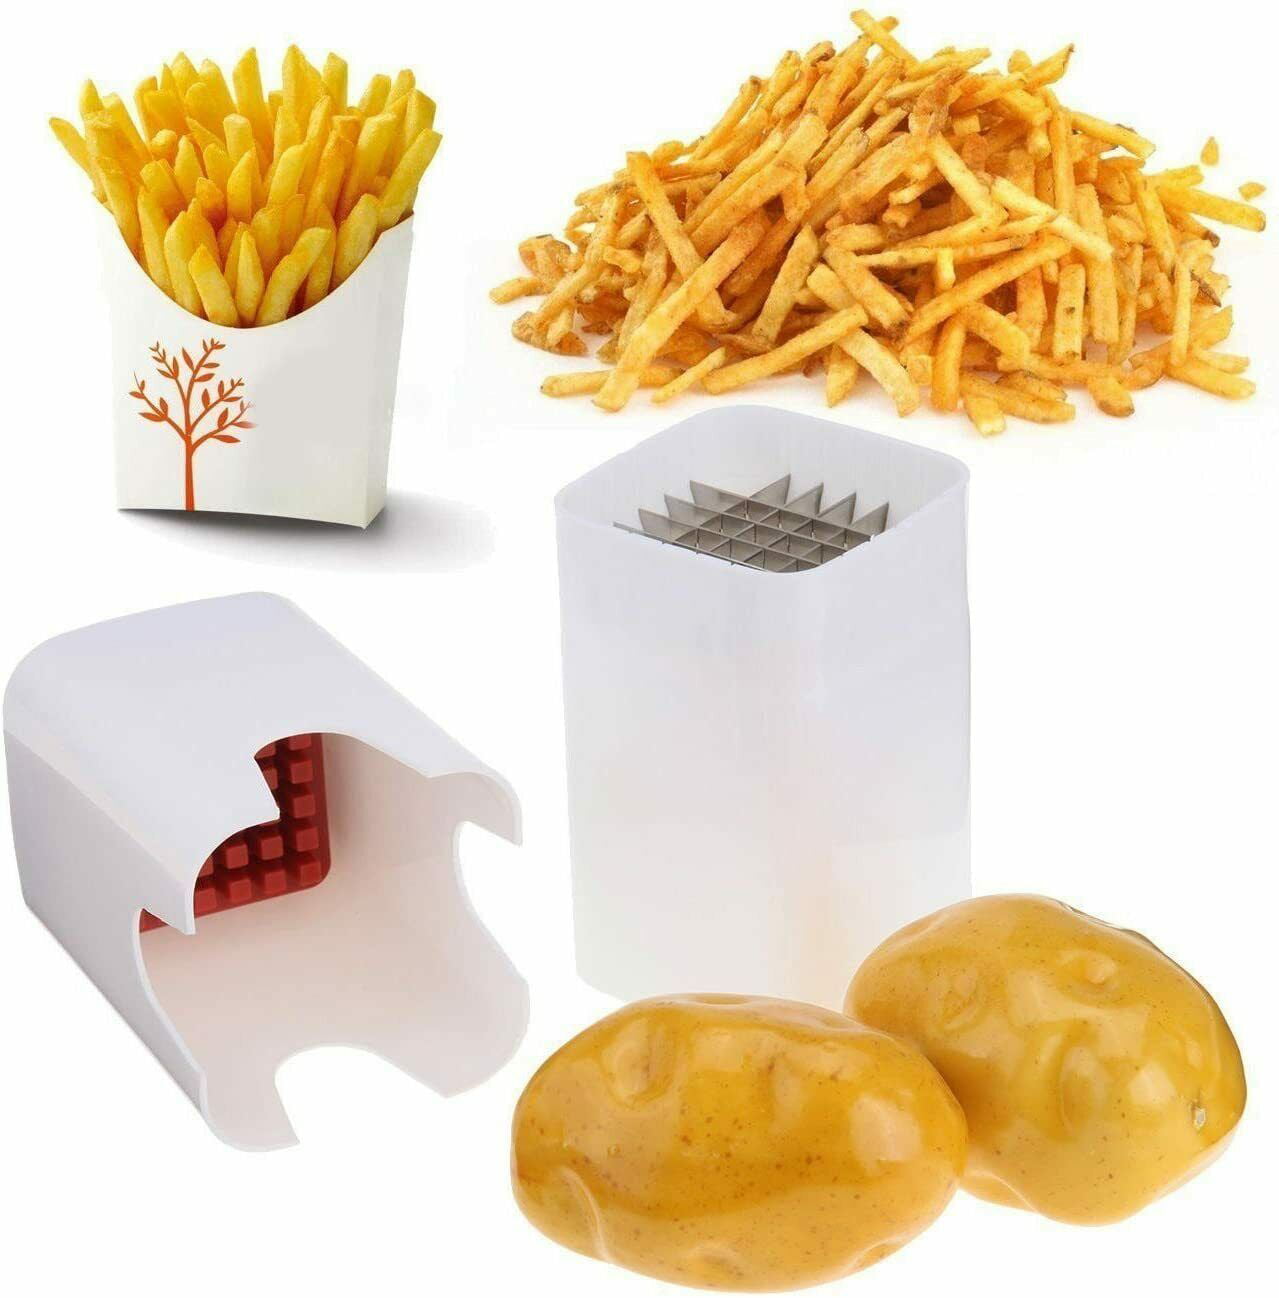 11 Best French Fry Cutter for Perfectly Cut Fries Every Time - Far & Away